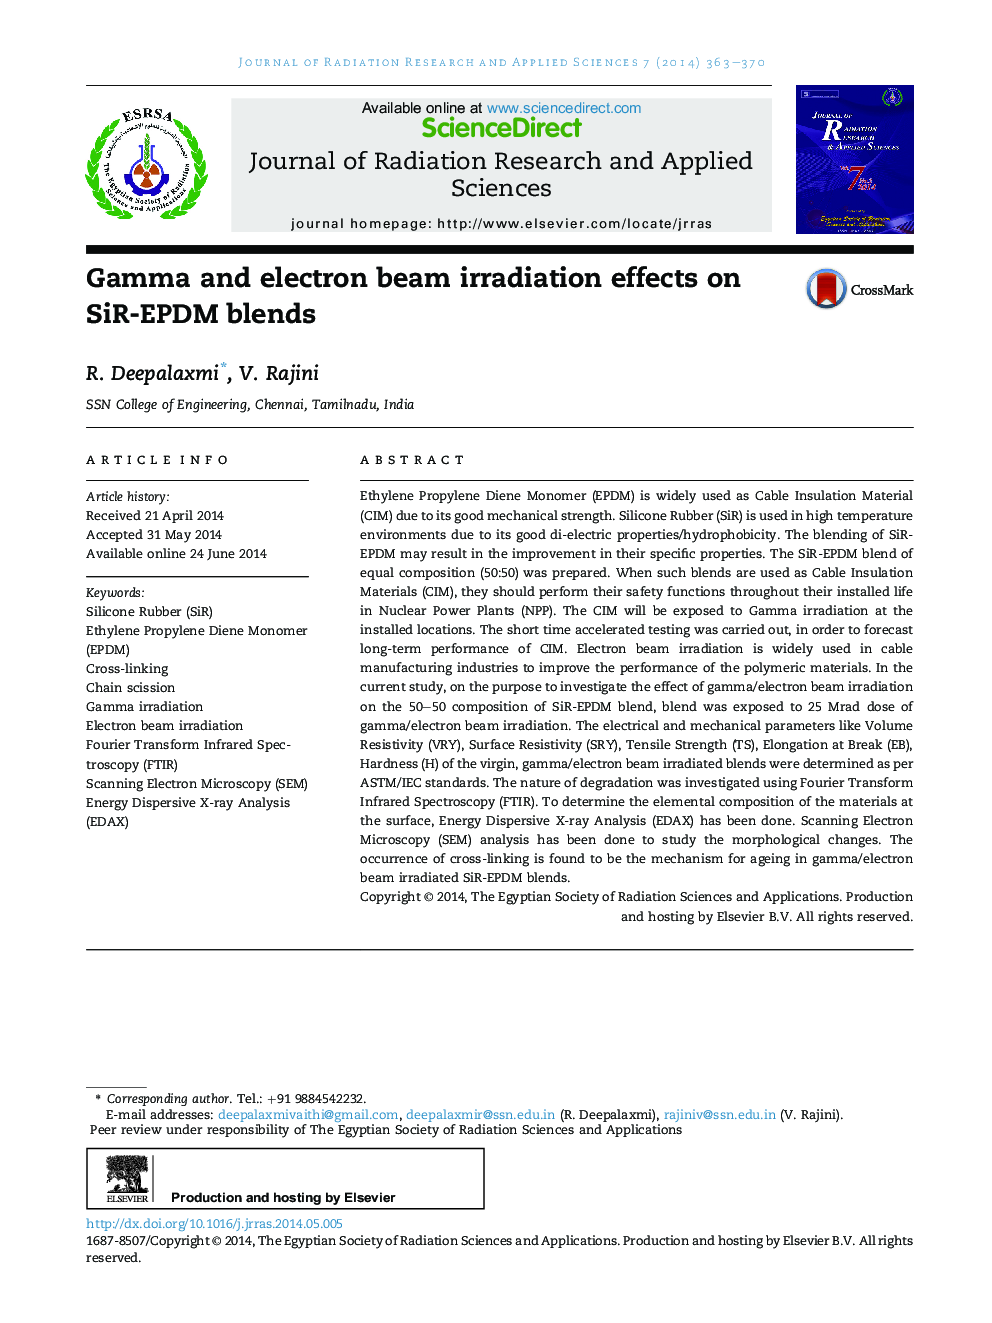 Gamma and electron beam irradiation effects on SiR-EPDM blends 